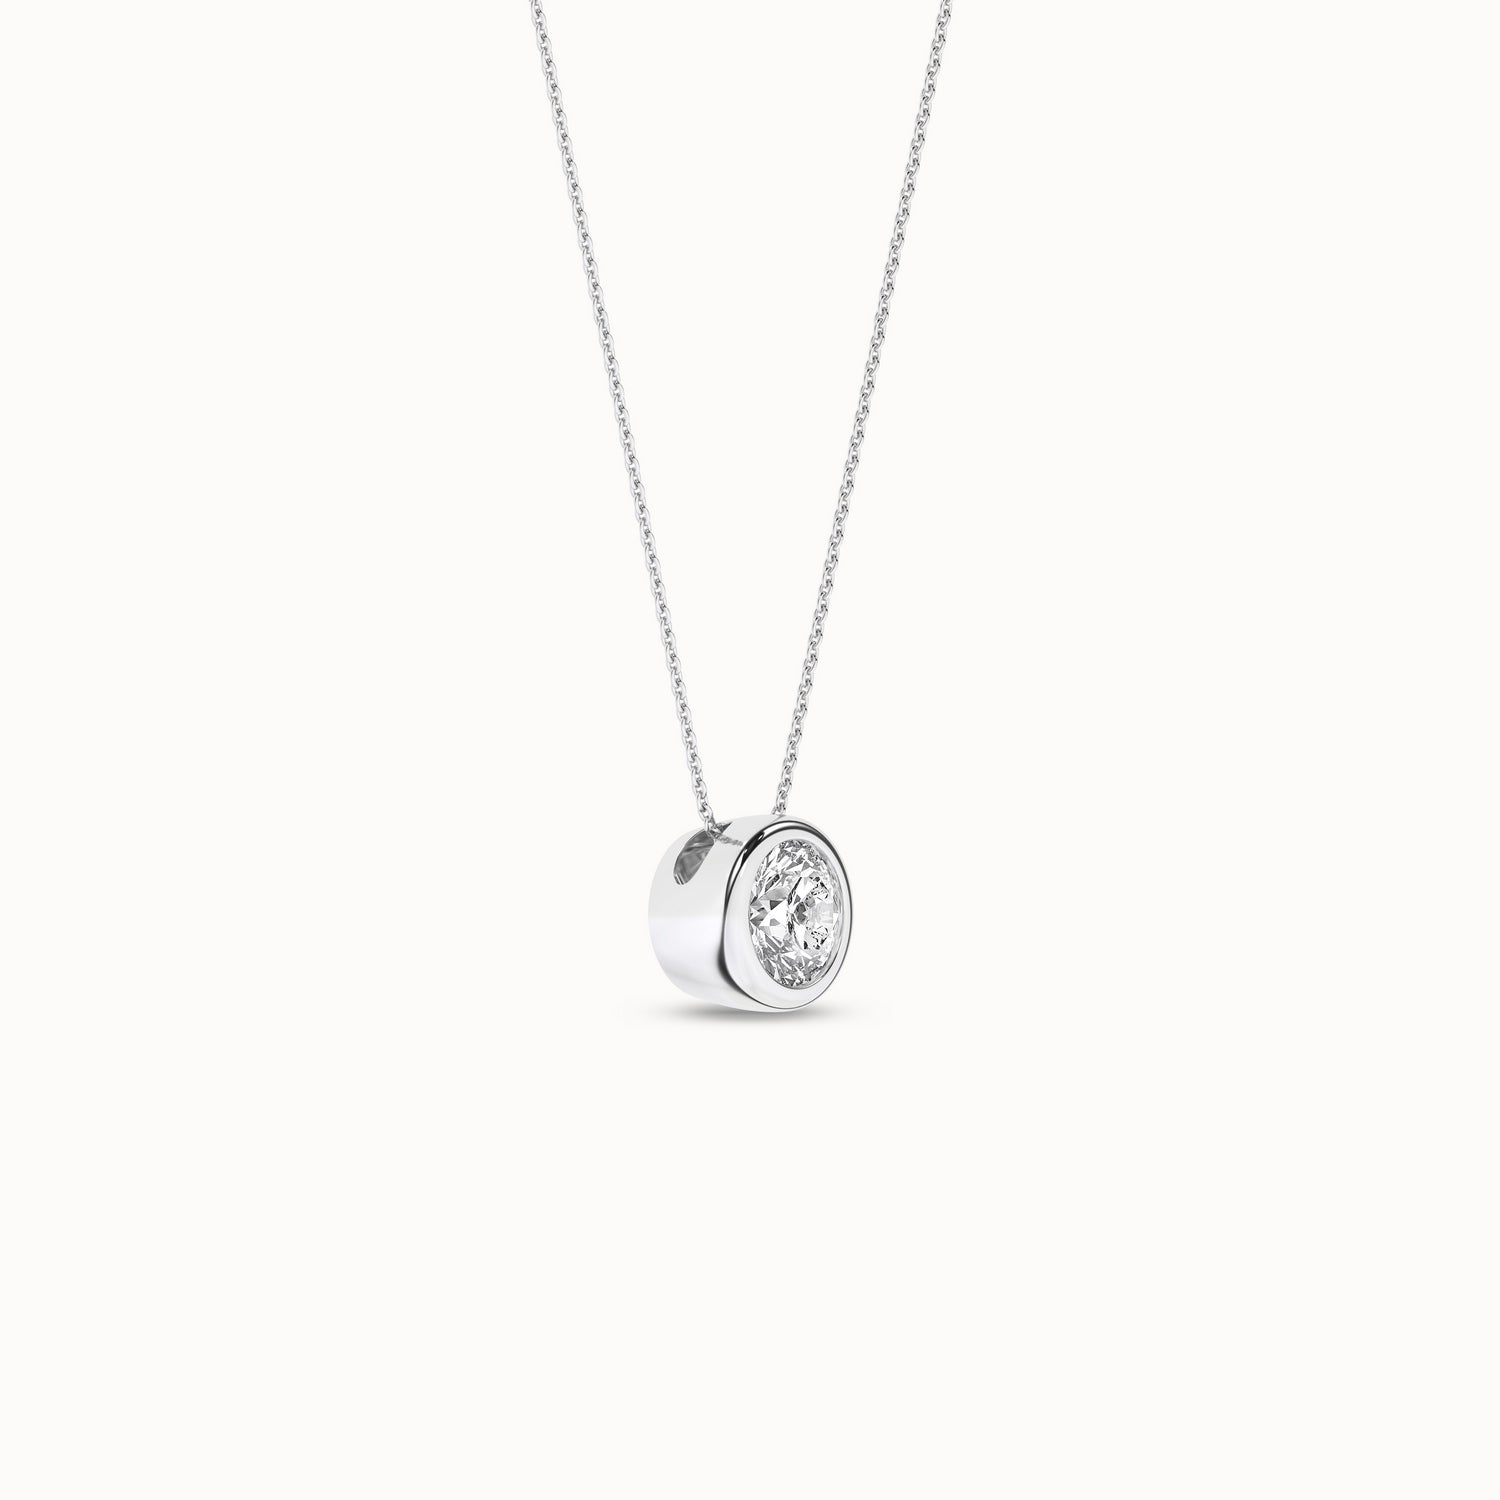 Encompassing Round Necklace_Product Angle_1/2Ct. - 3